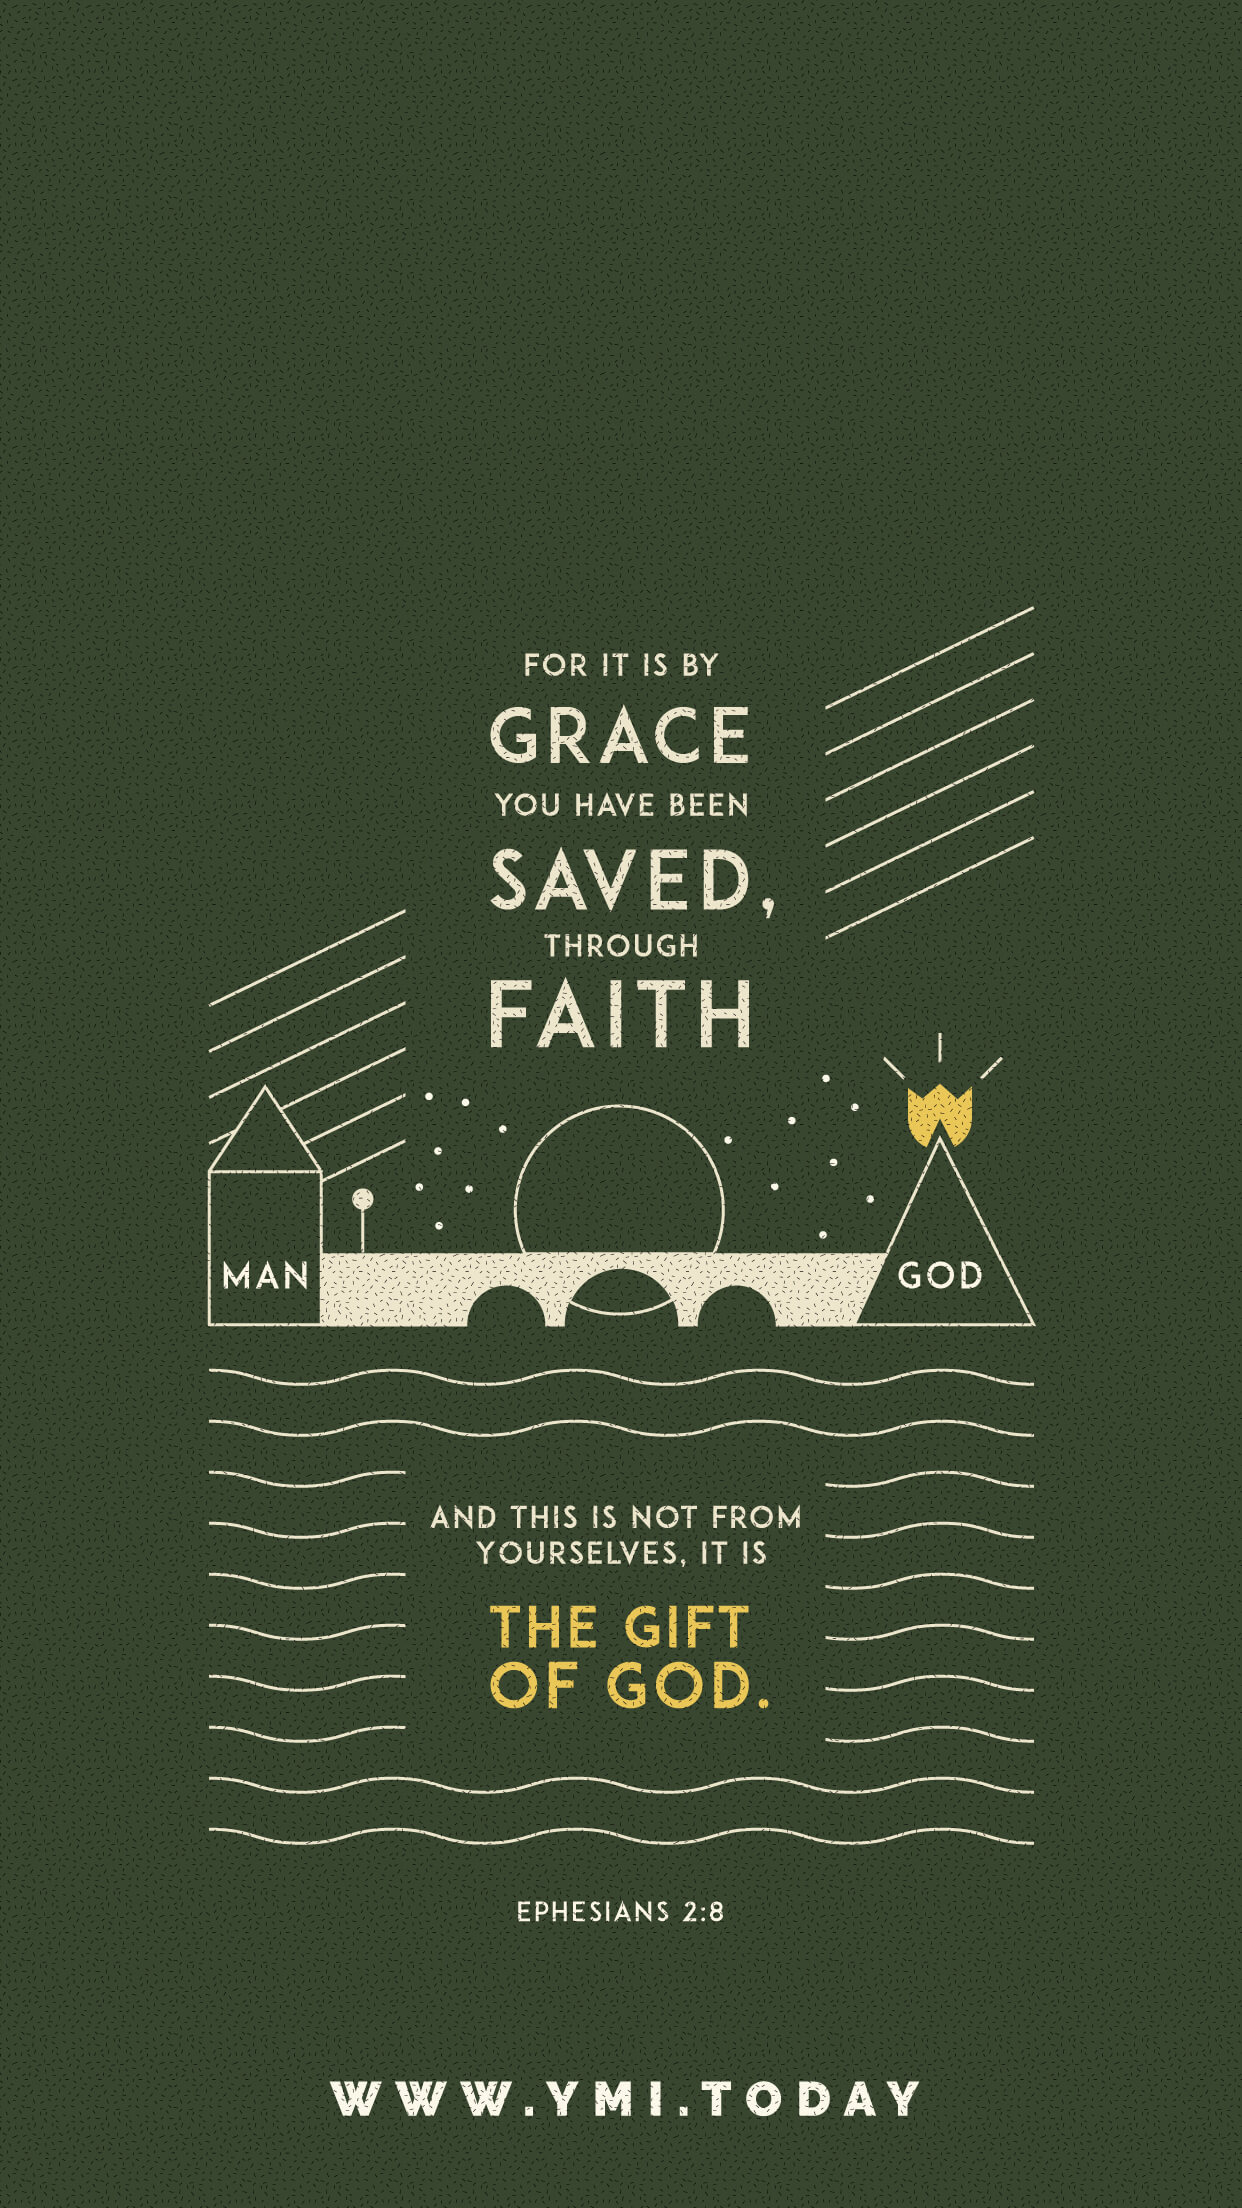 YMI August 2016 Phone Lockscreen - For it is by grace you have been saved through faith; and this is not from yourselves, it is the gift of God.- Ephesians 2:8